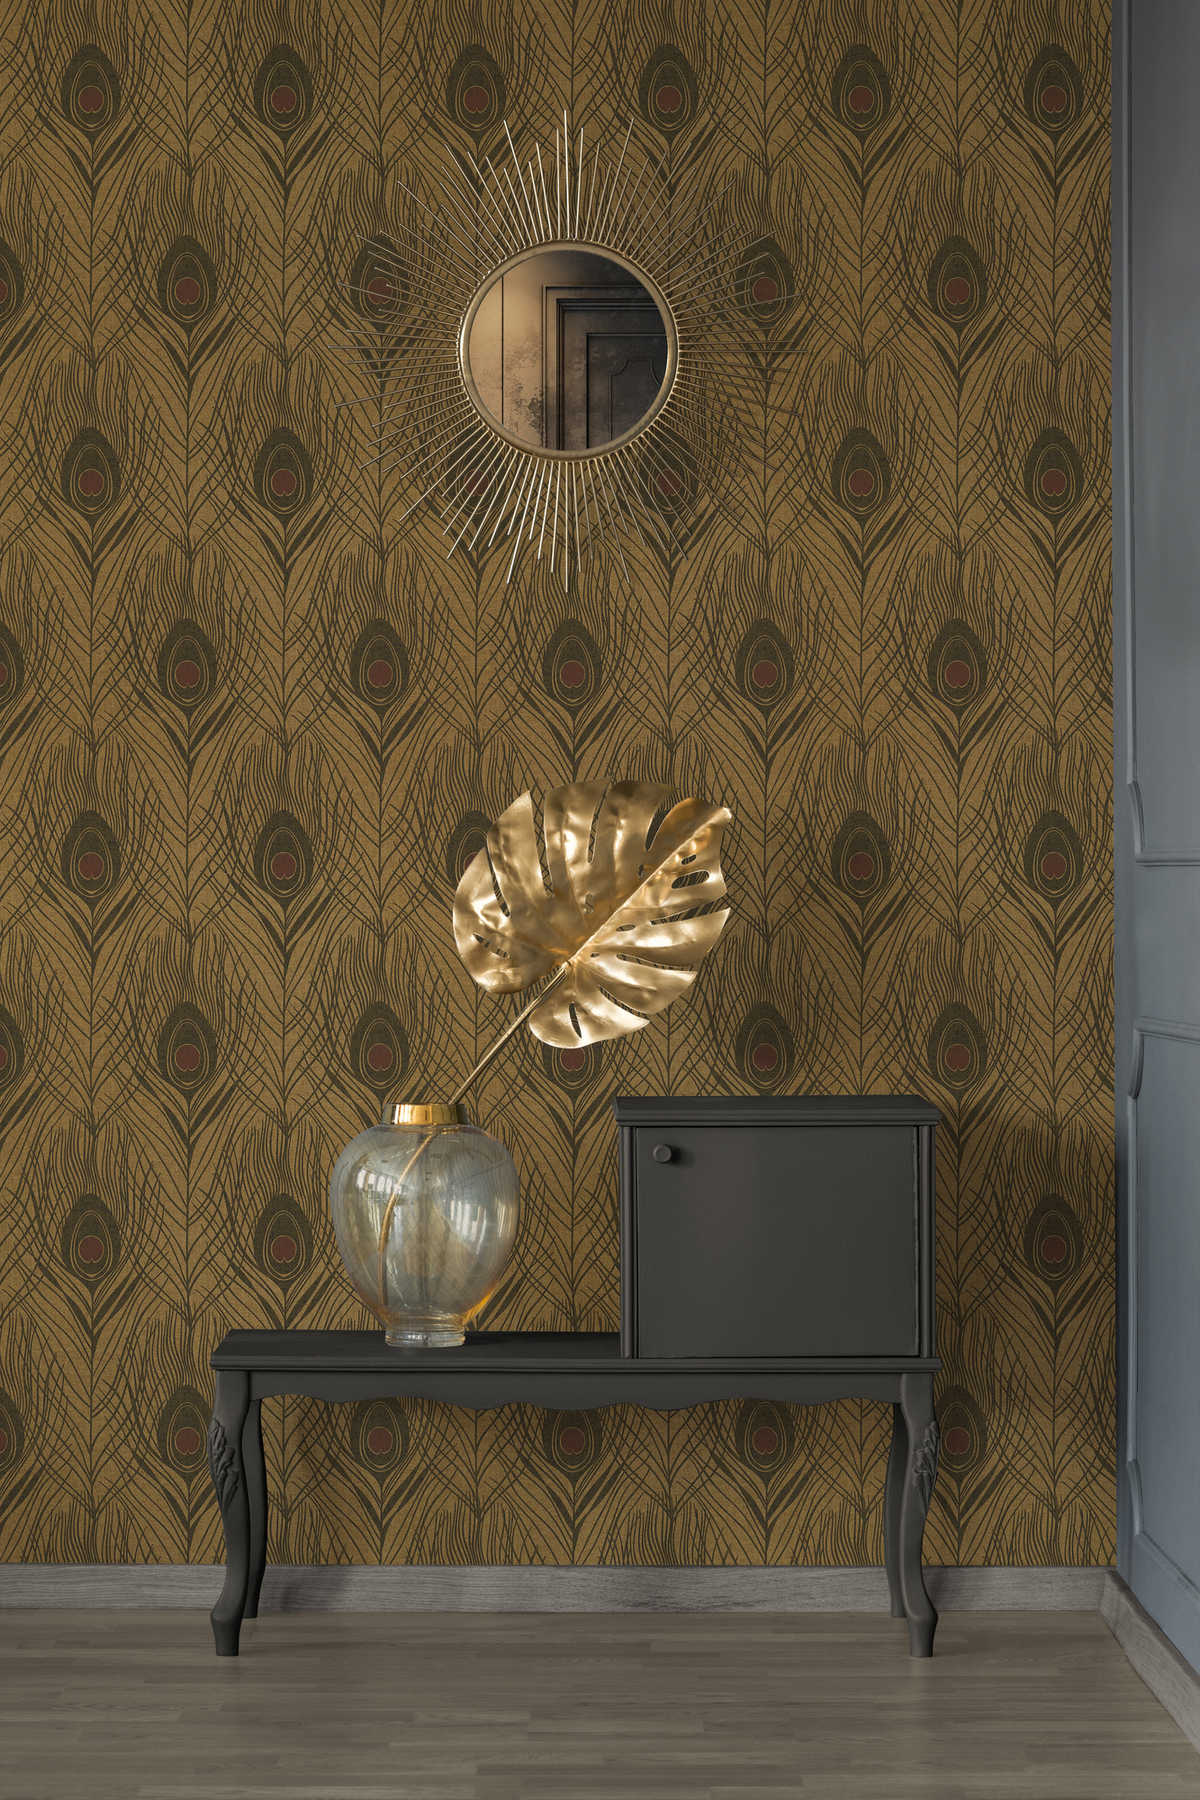             Golden non-woven wallpaper with peacock feathers - black, gold, brown
        